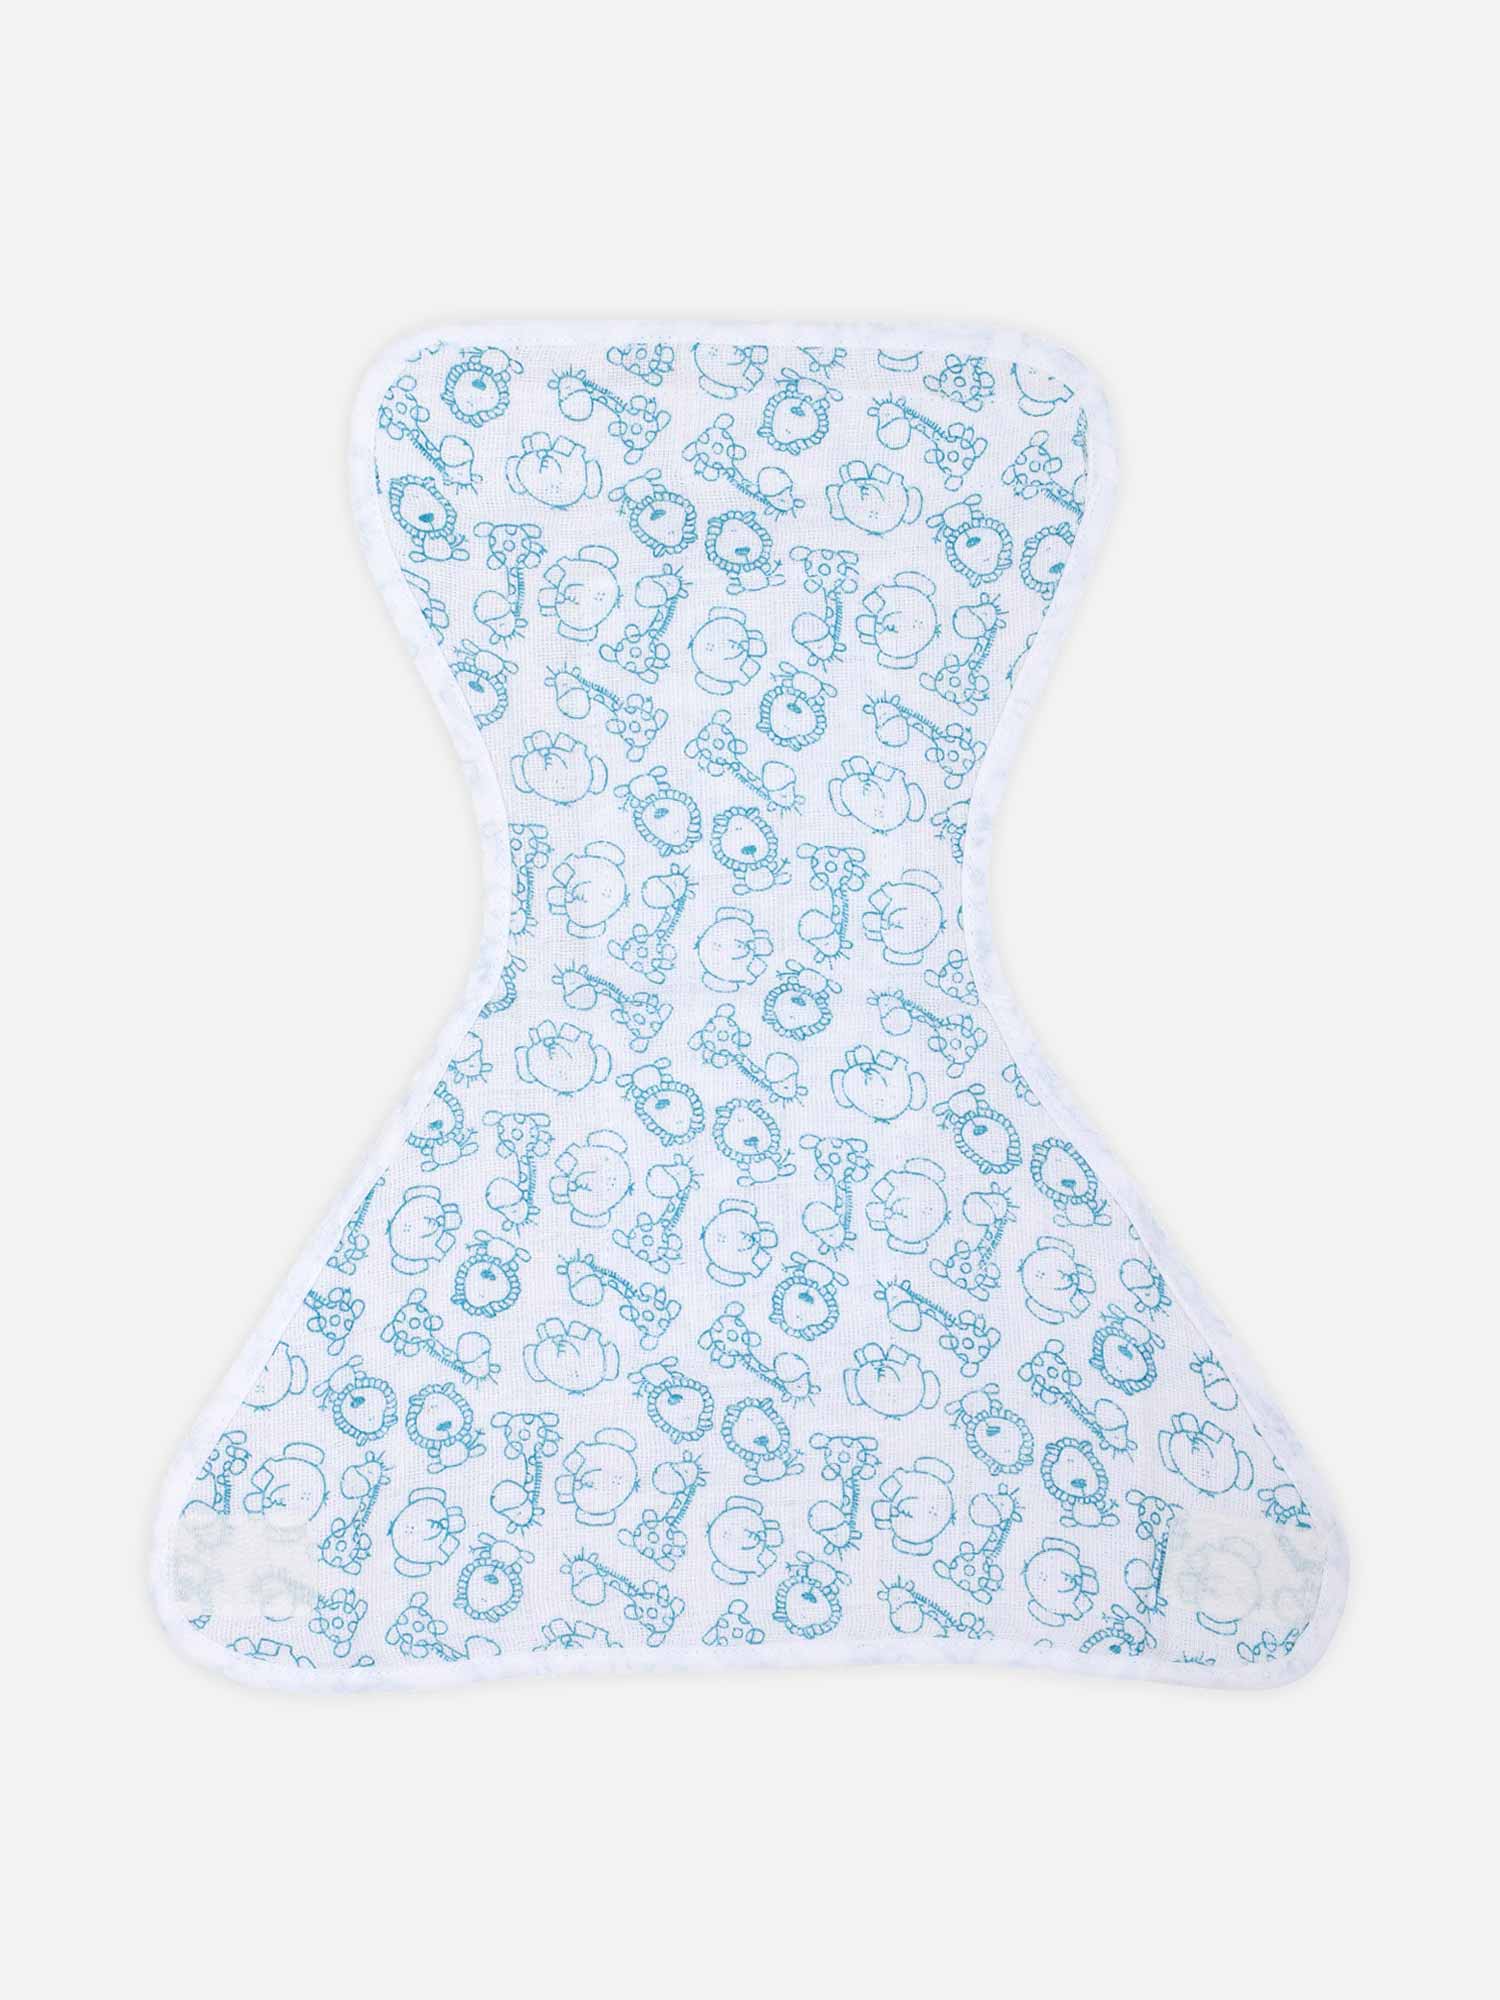 Oh Baby Printed Velcro Nappies Blue - Ltpr